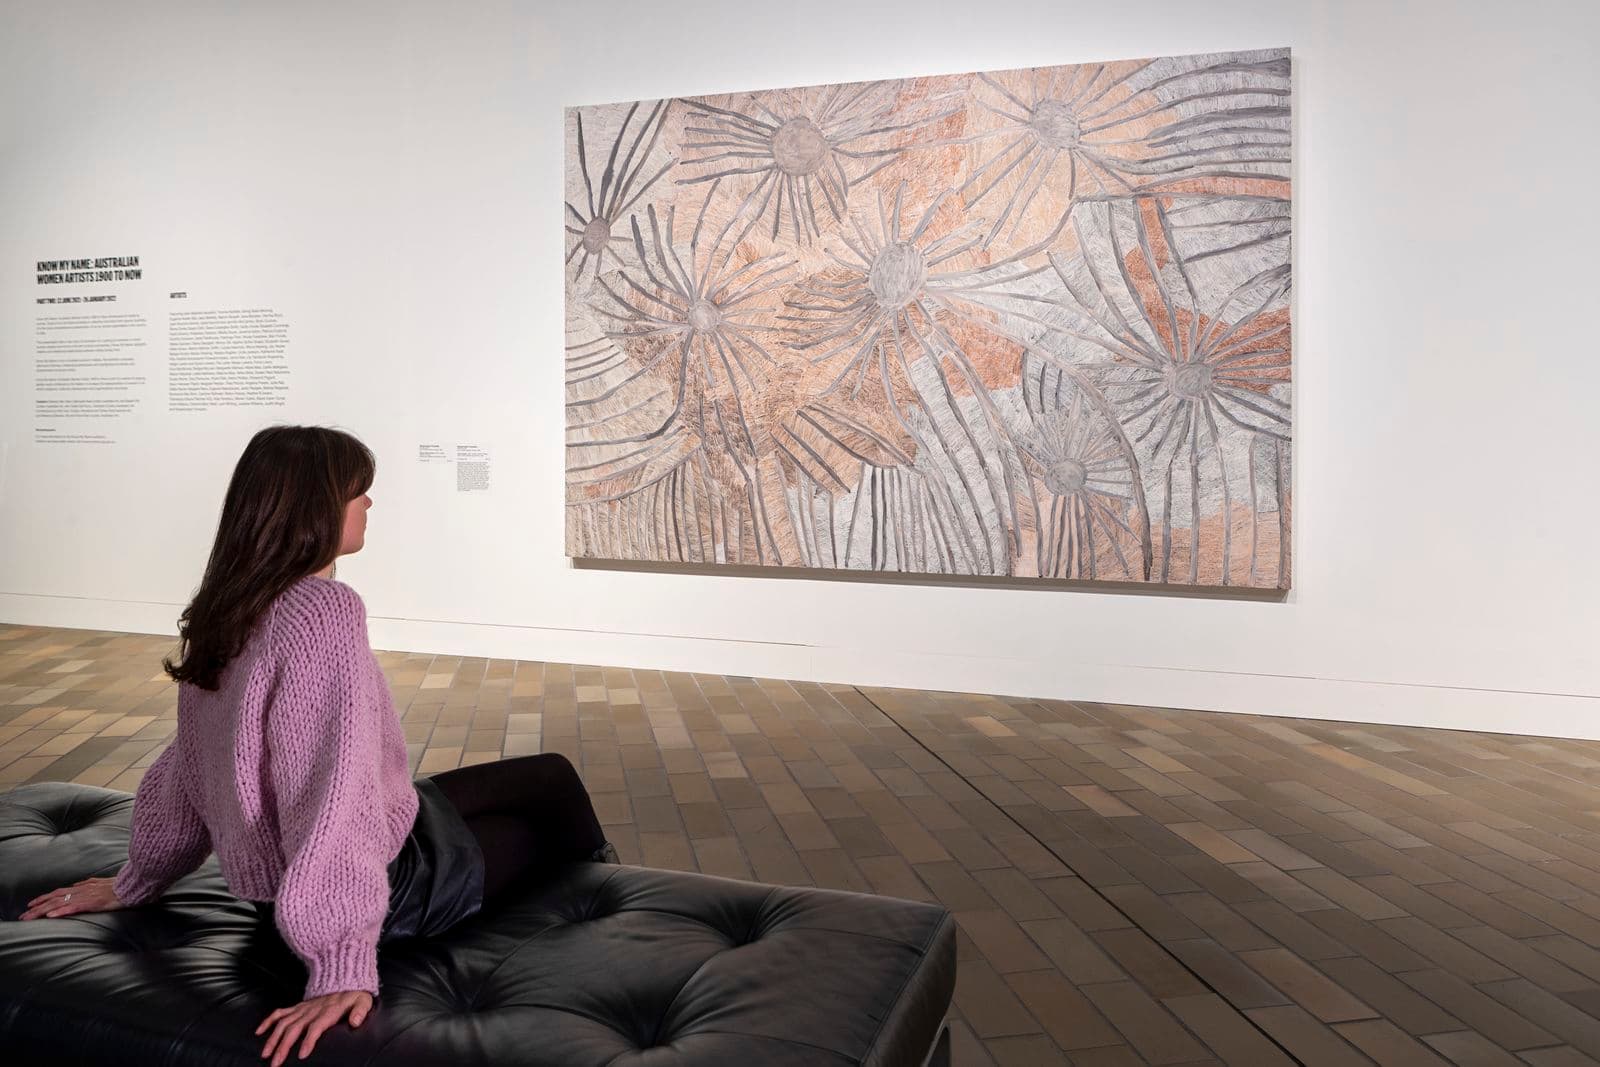 Photograph of woman sitting on black seat looking at artwork